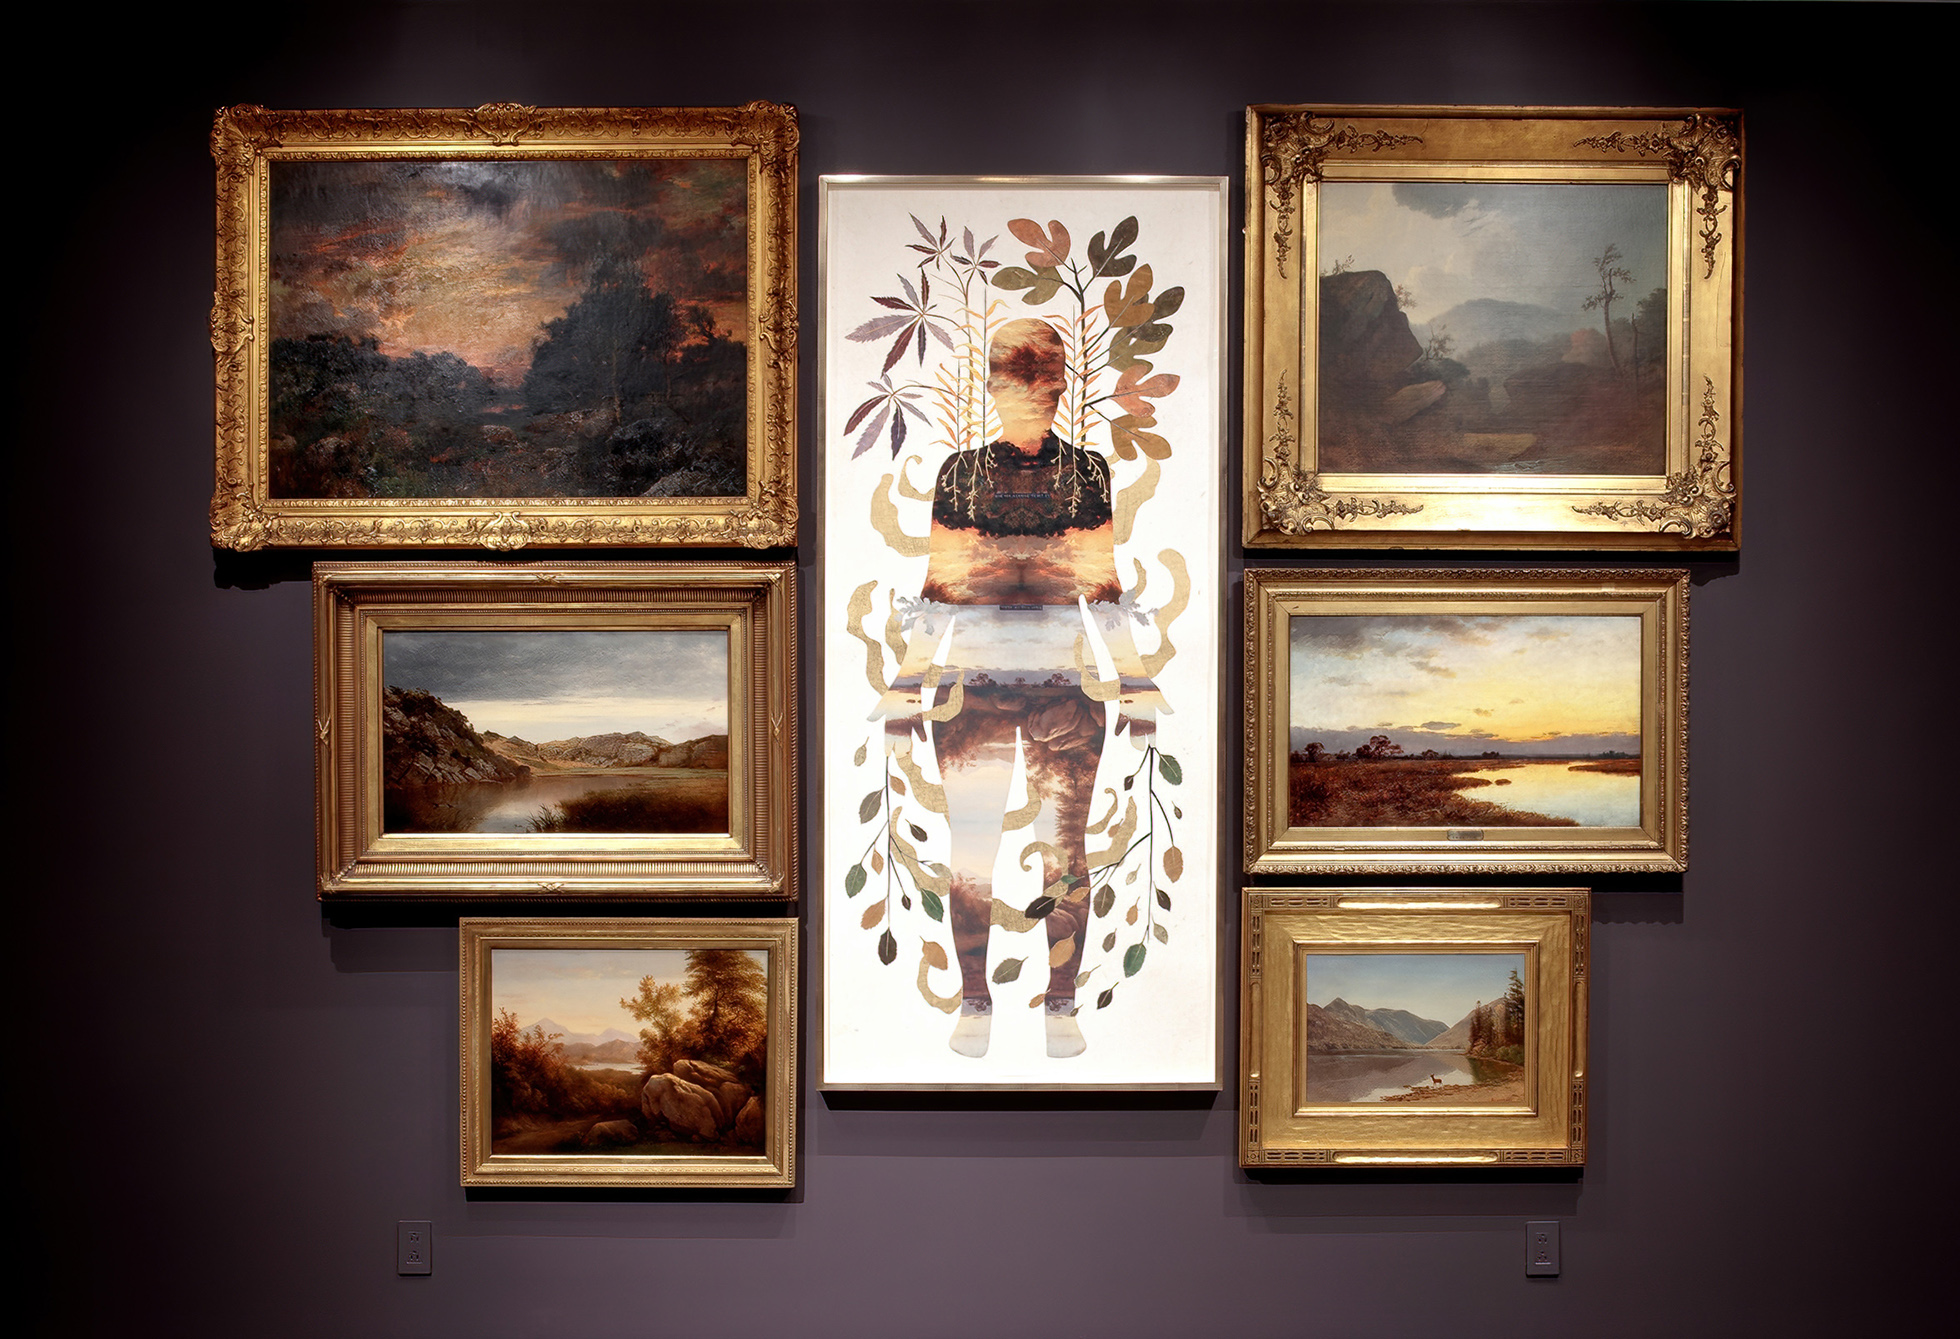 the artist's self-portrait installed among works by Hudson River School painters